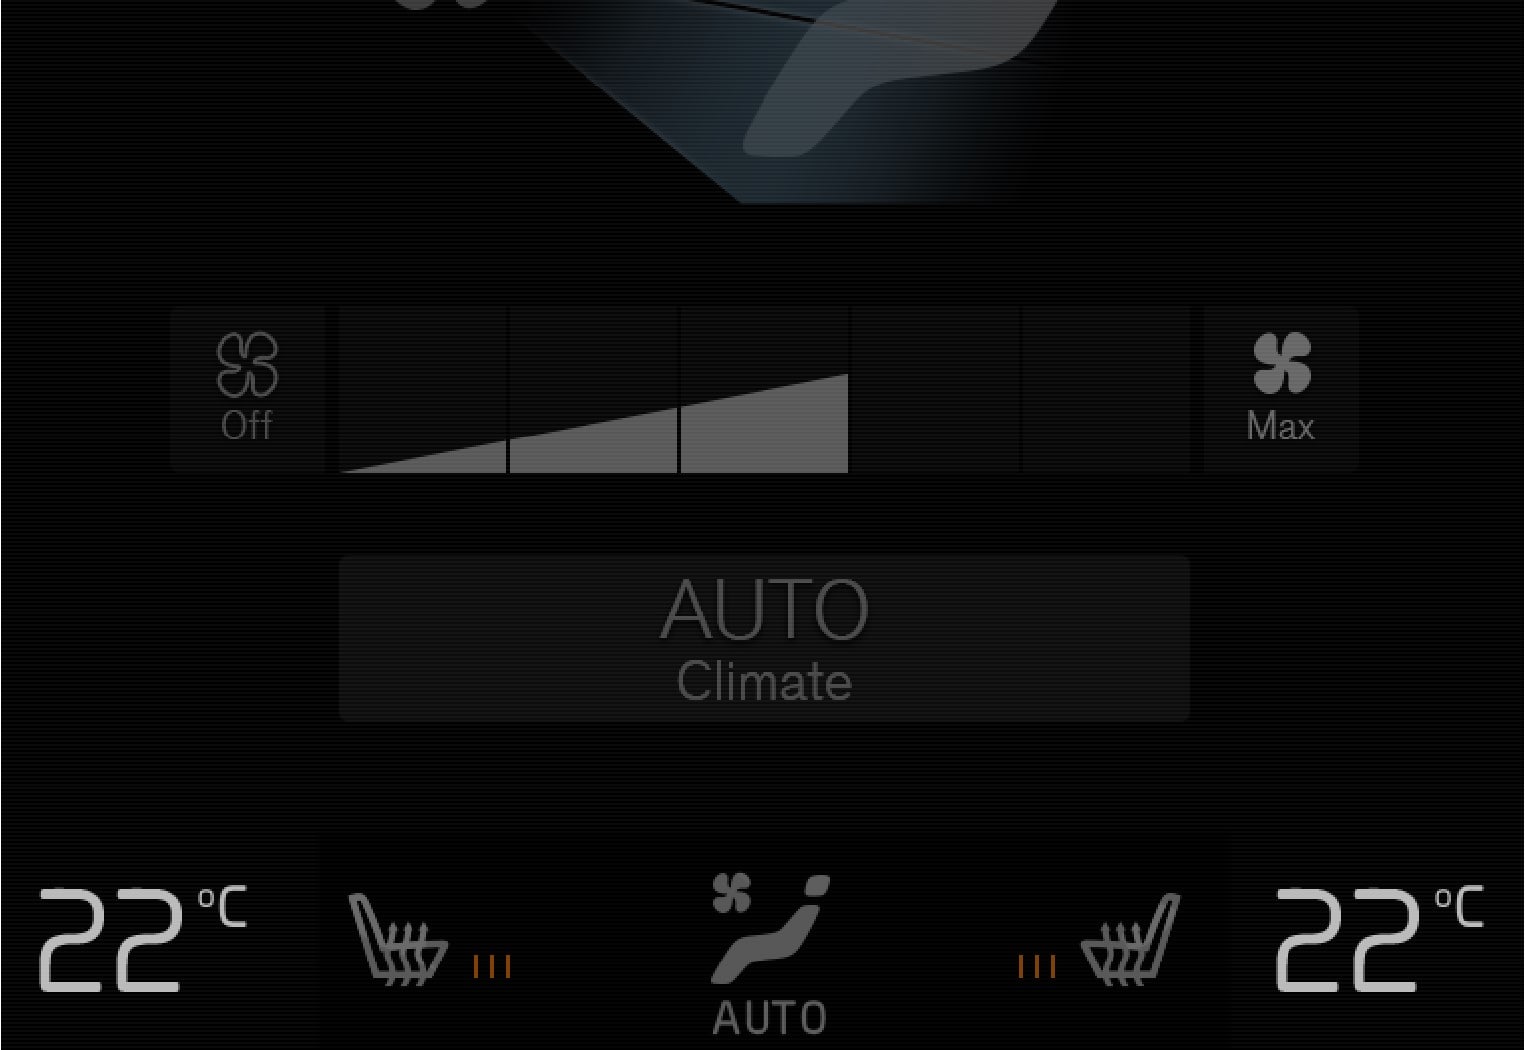 Temperature buttons in the climate row.